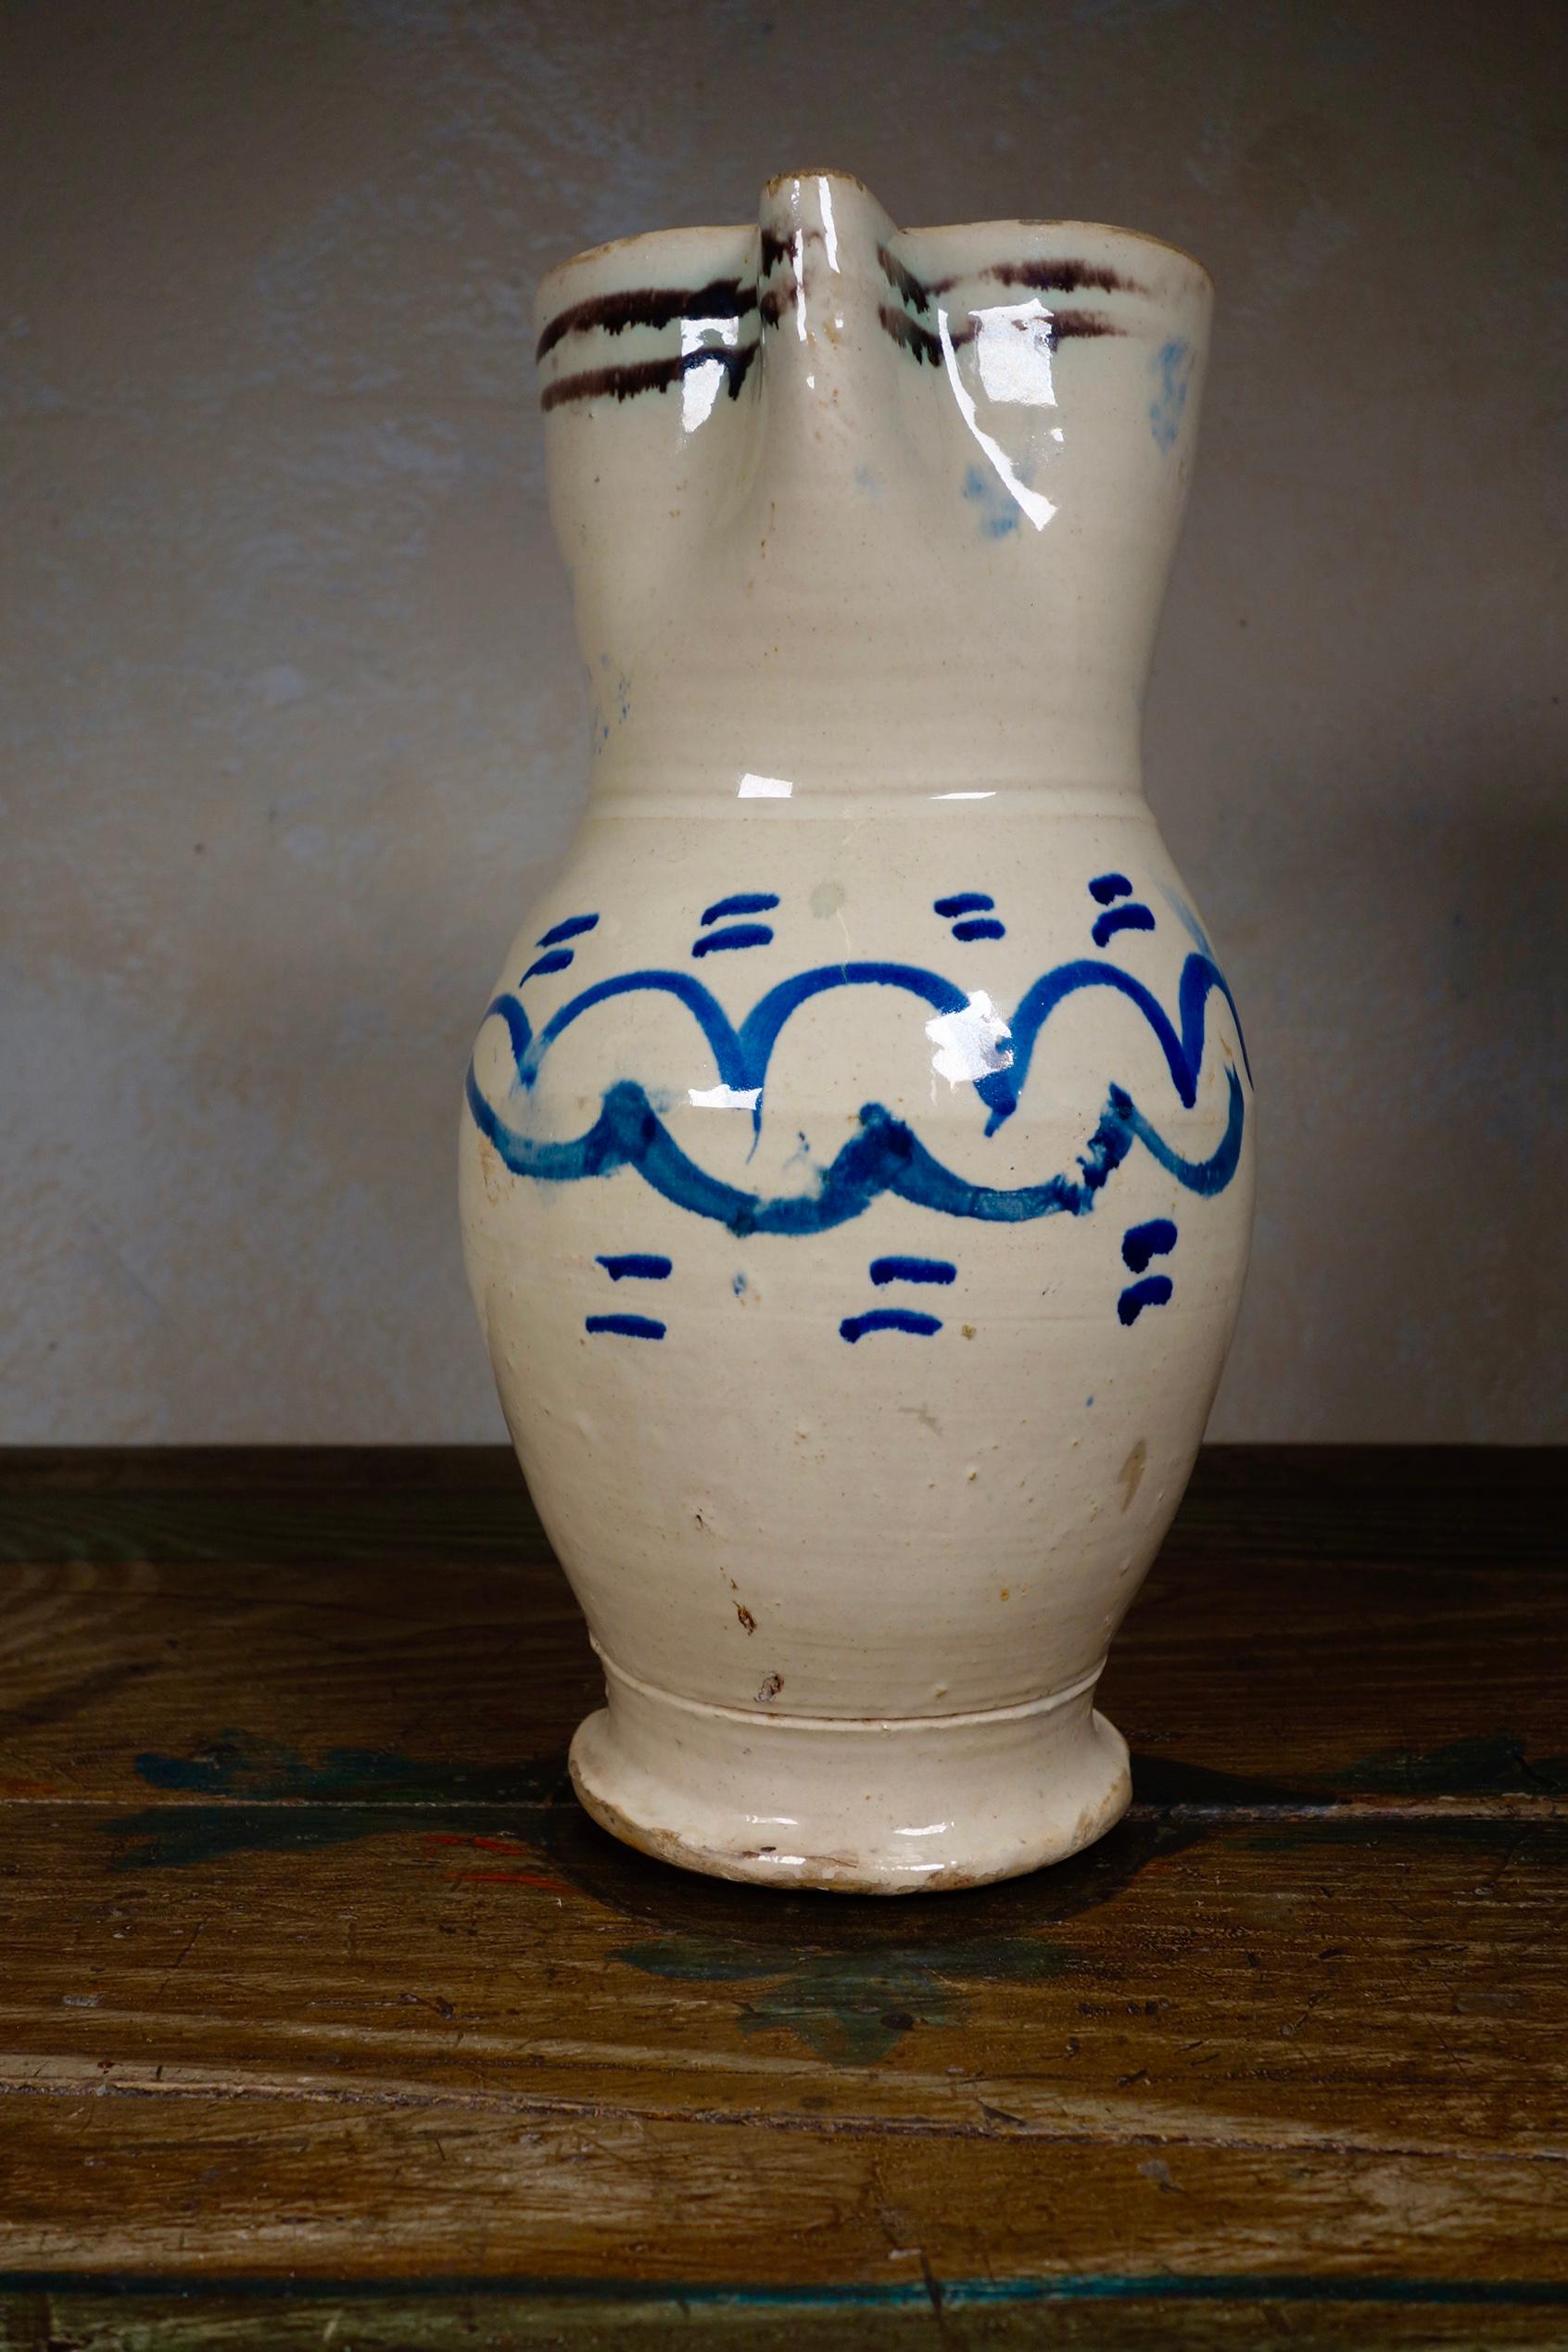 A large antique tin-glaze Pugliese Pitcher. 
Featuring an elongated ovoid-shape body with a disc foot. The flat strap handle rises from just under the rim and ends just before the widest part of the lower body. 
Painted with simple geometric